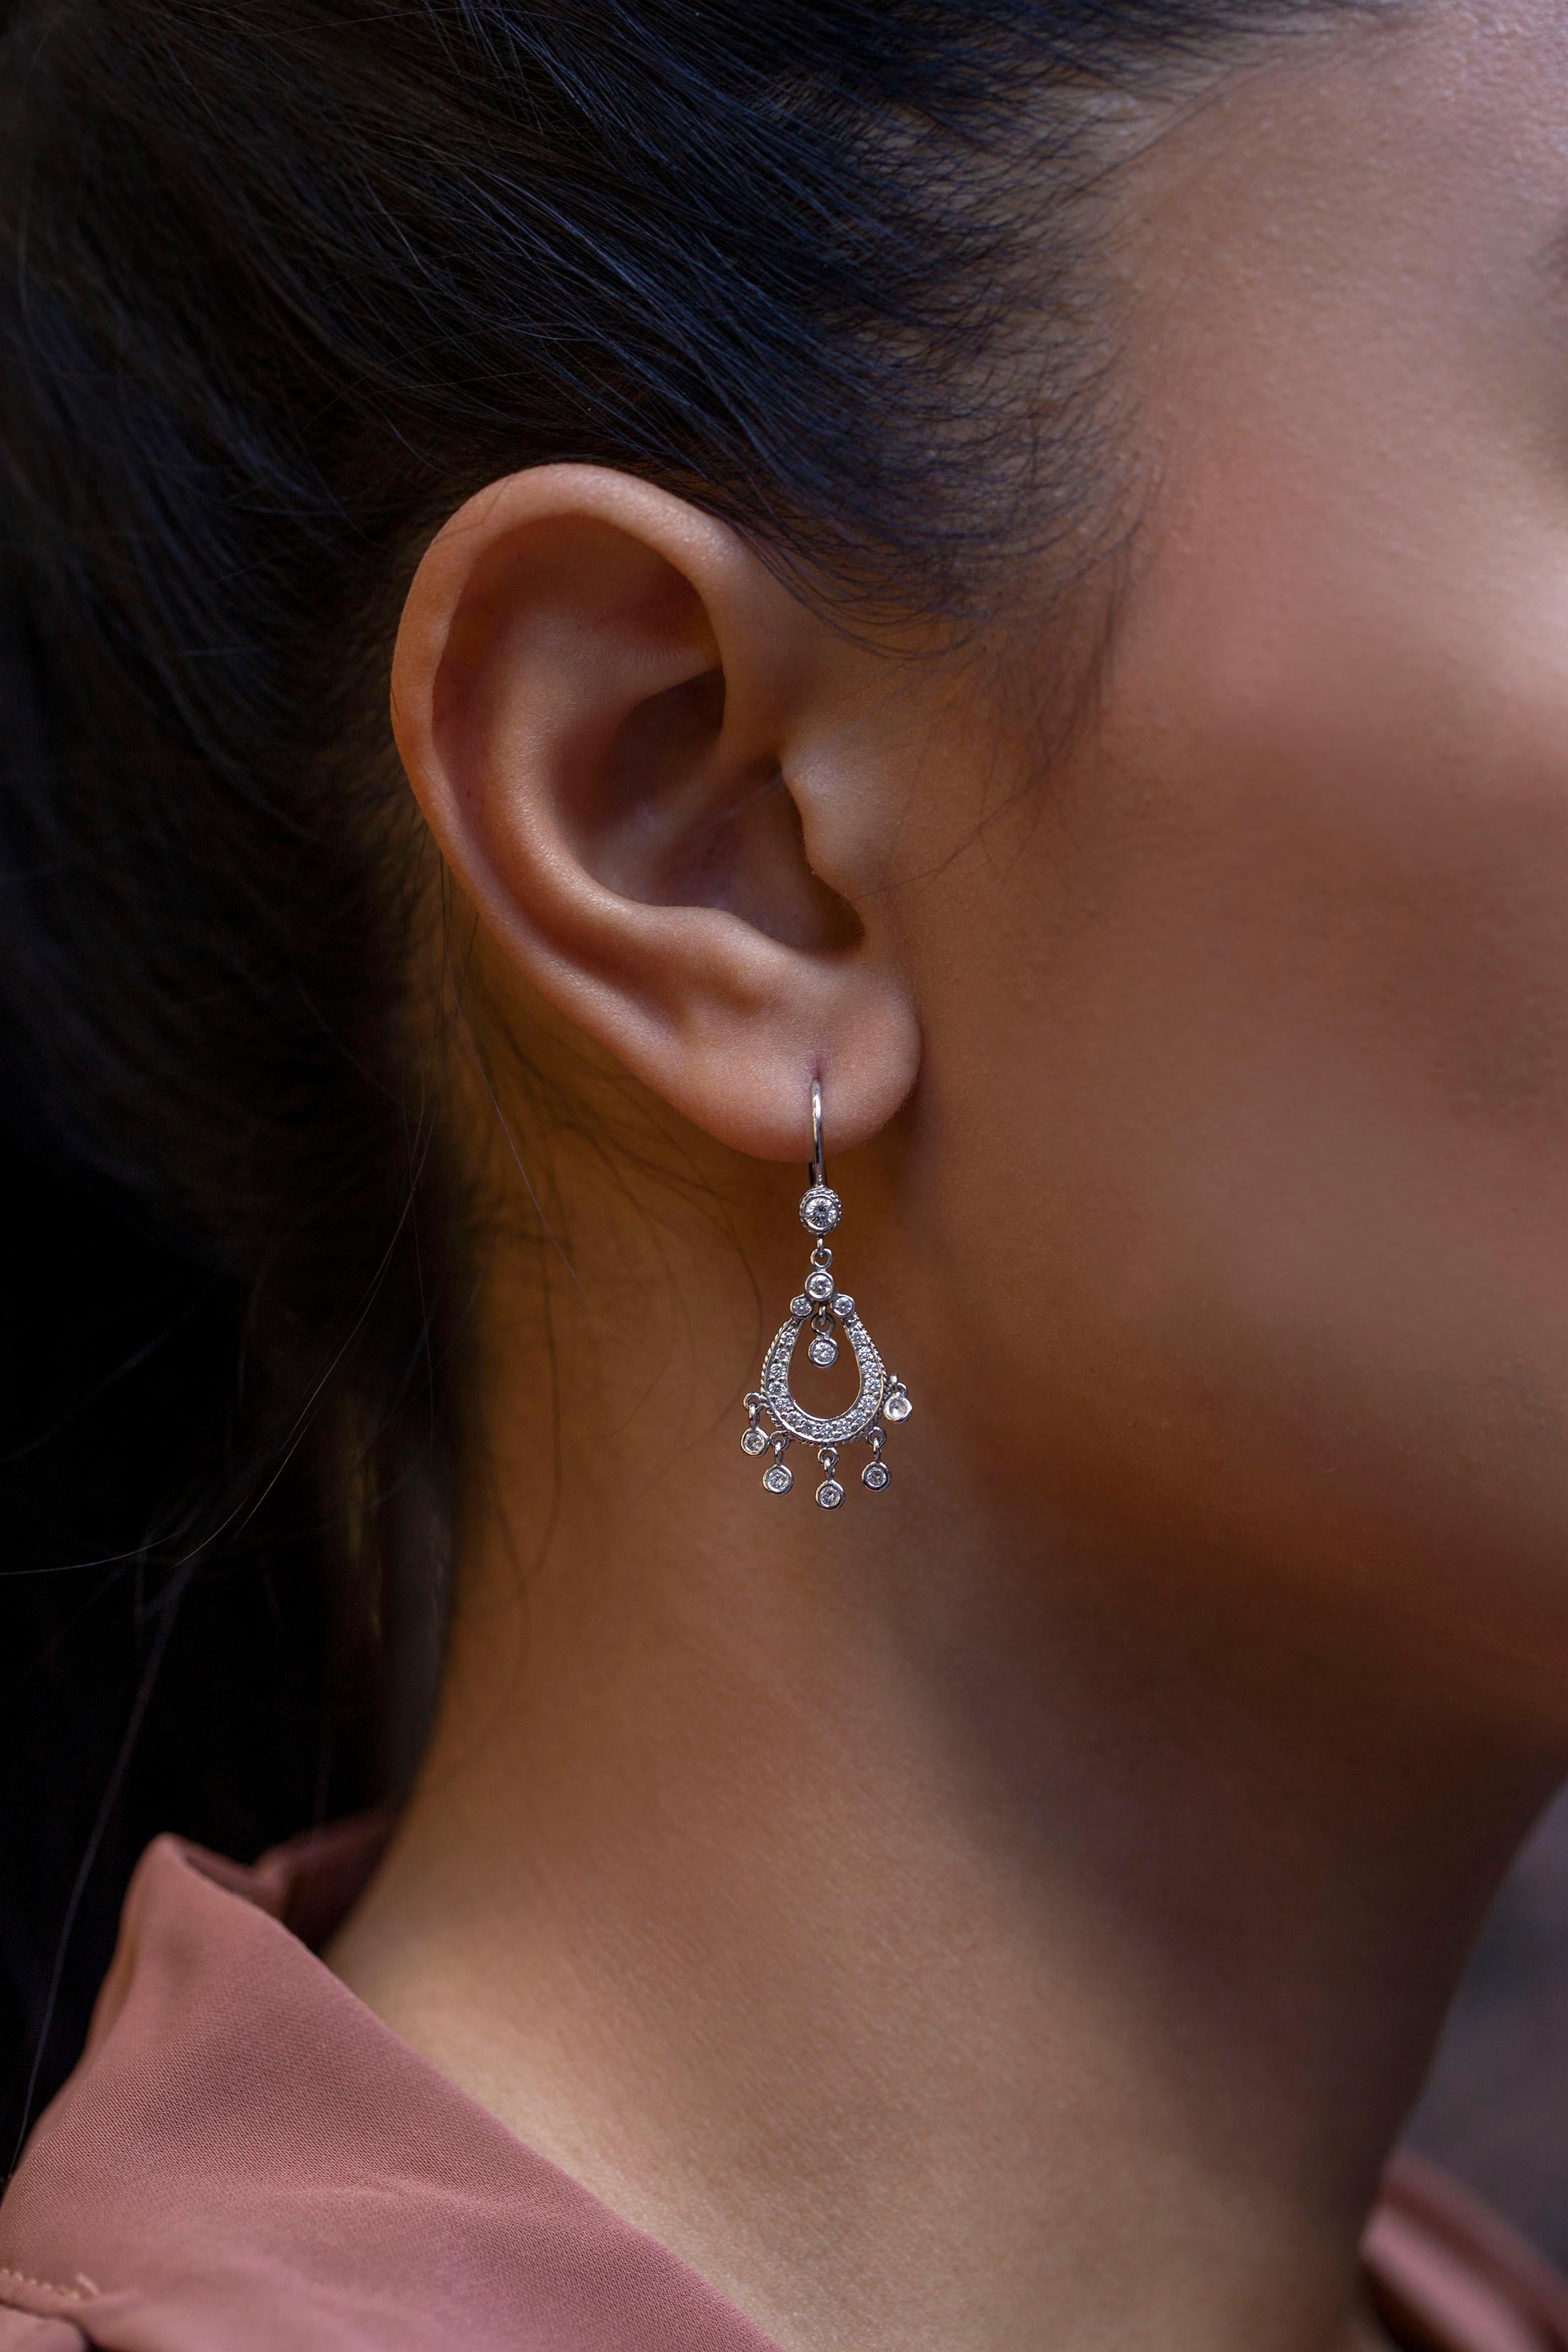 An elegant dangle earrings features 0.68 carats of brilliant round diamonds pave set in a horse-shoe shape with twisted rope edges. Accented by five bezel set round diamond fringes. Made in 18K White Gold. 

Style available in different price